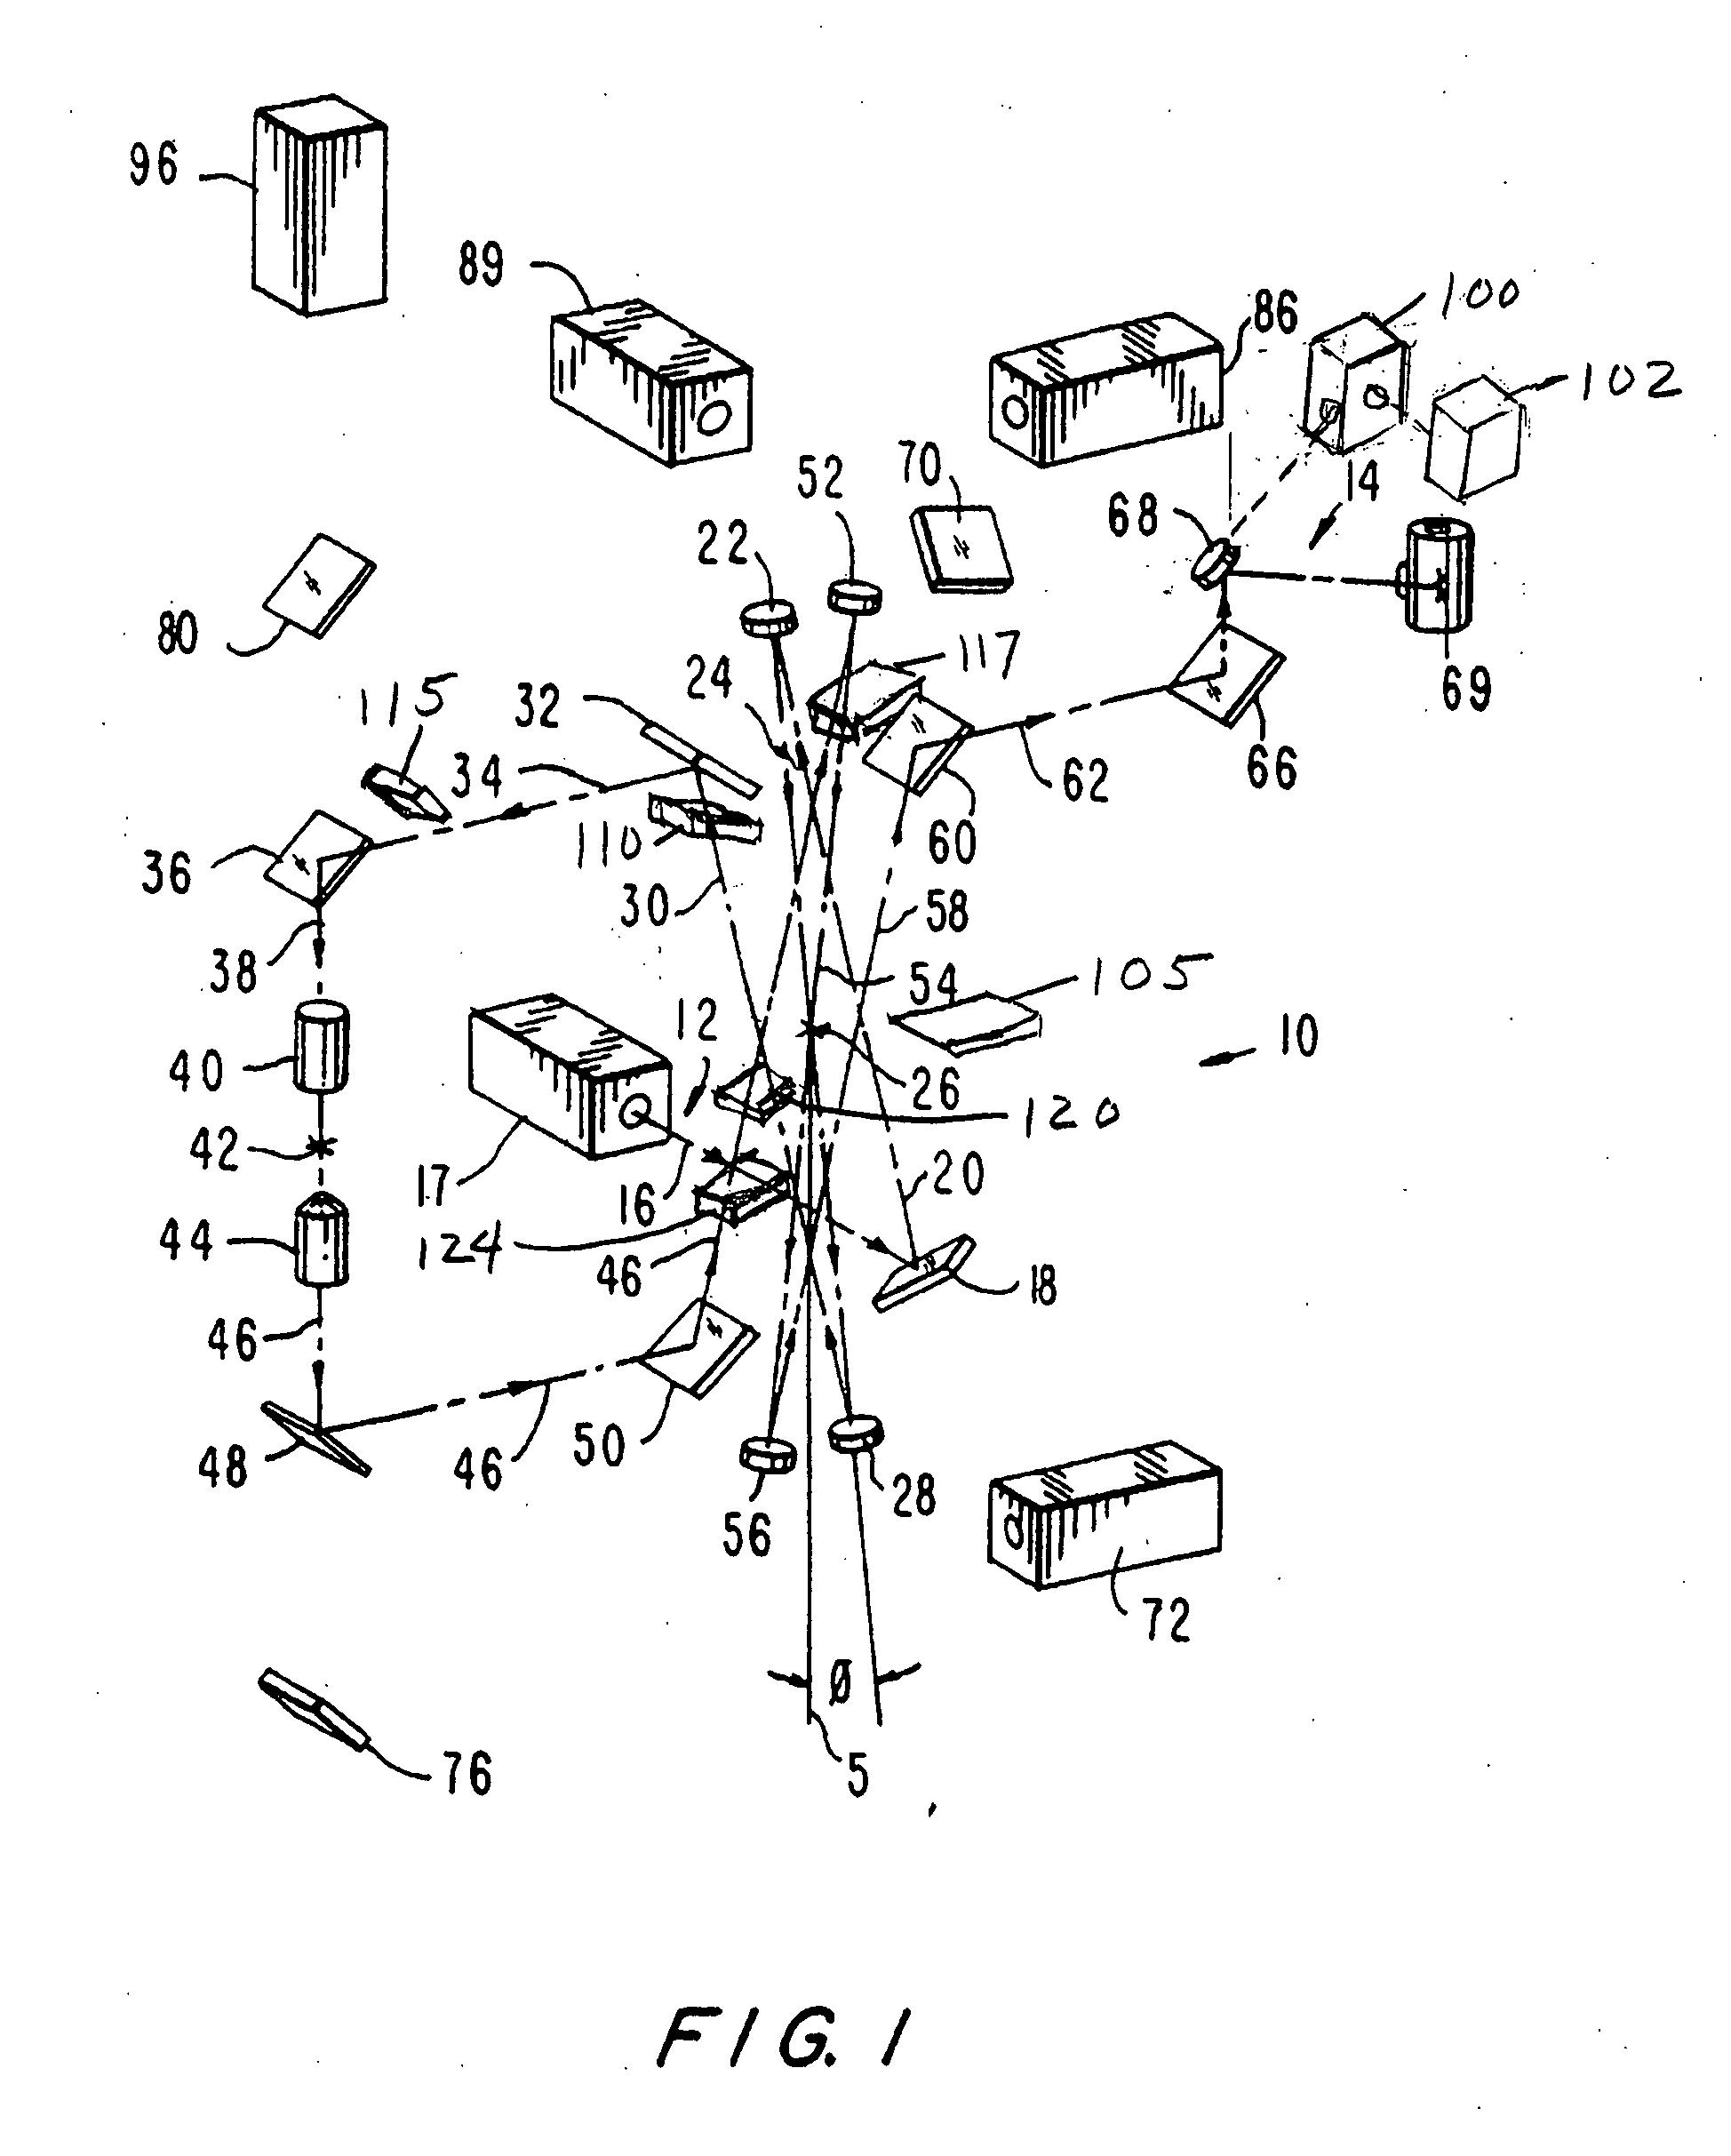 Microspectrometer system with selectable aperturing